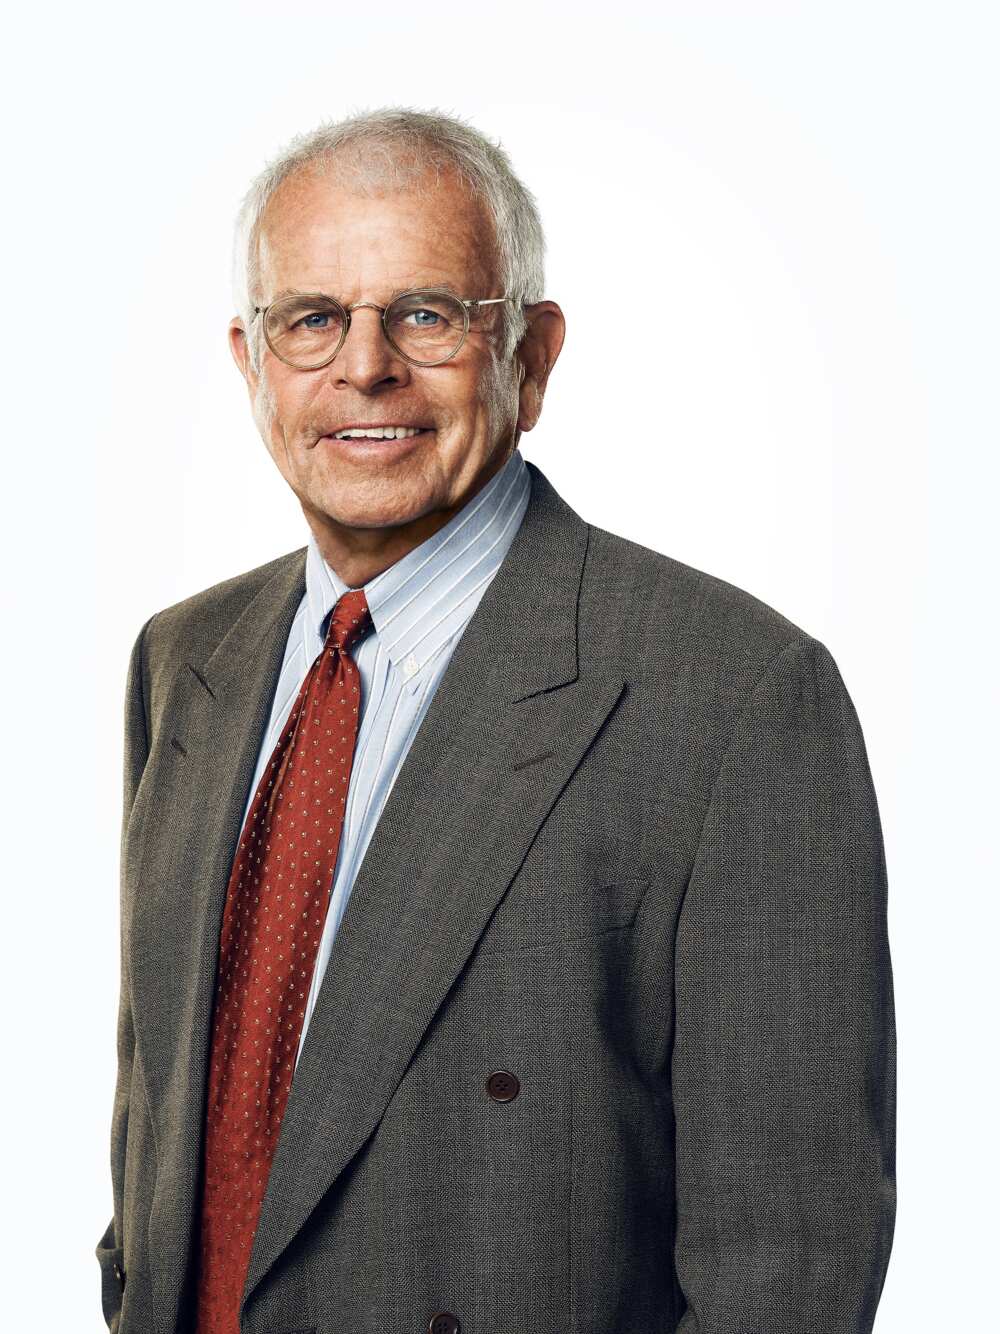 What movies did William Devane play in?